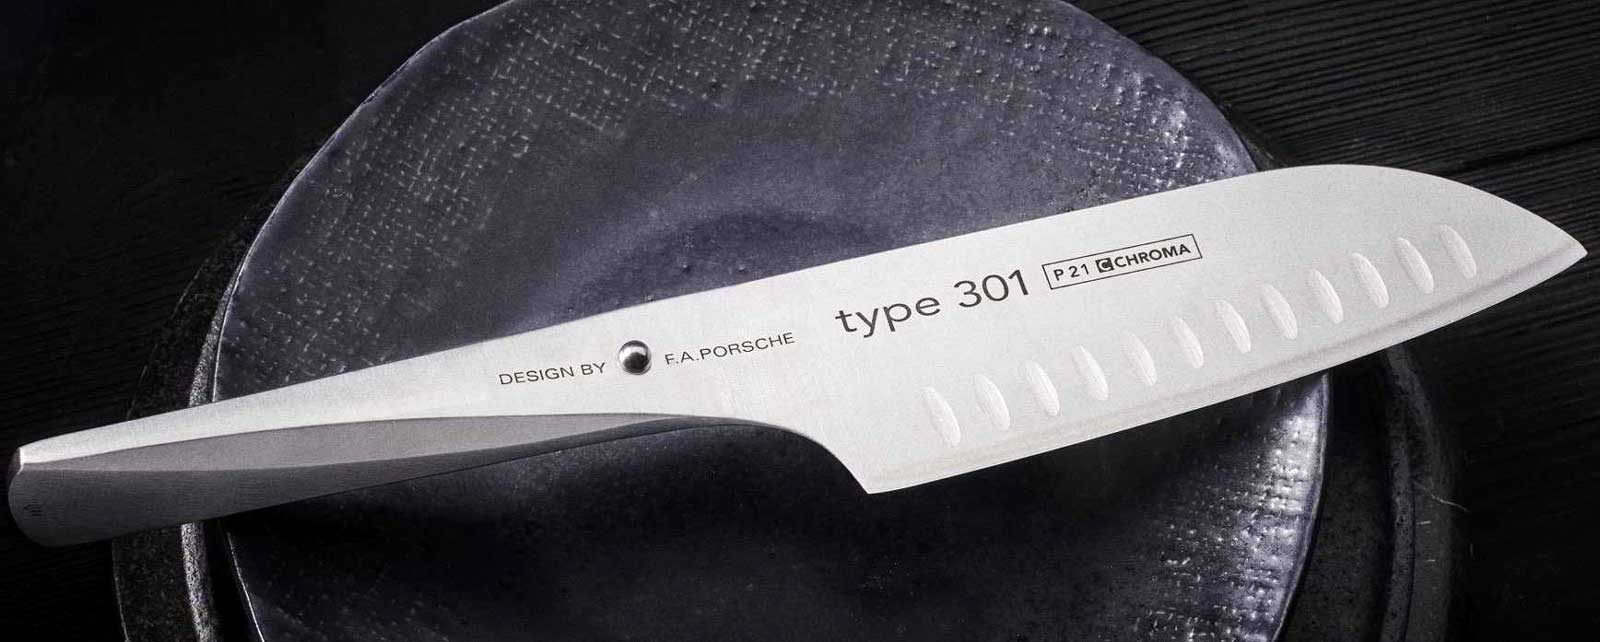 CHROMA type 301 - Design by FA Porsche - Chef`s Knife With these innovative knives Type 301, designed by the Design Wrought FA Porsche, a new chapter has been opened in the development of kitchen knives.